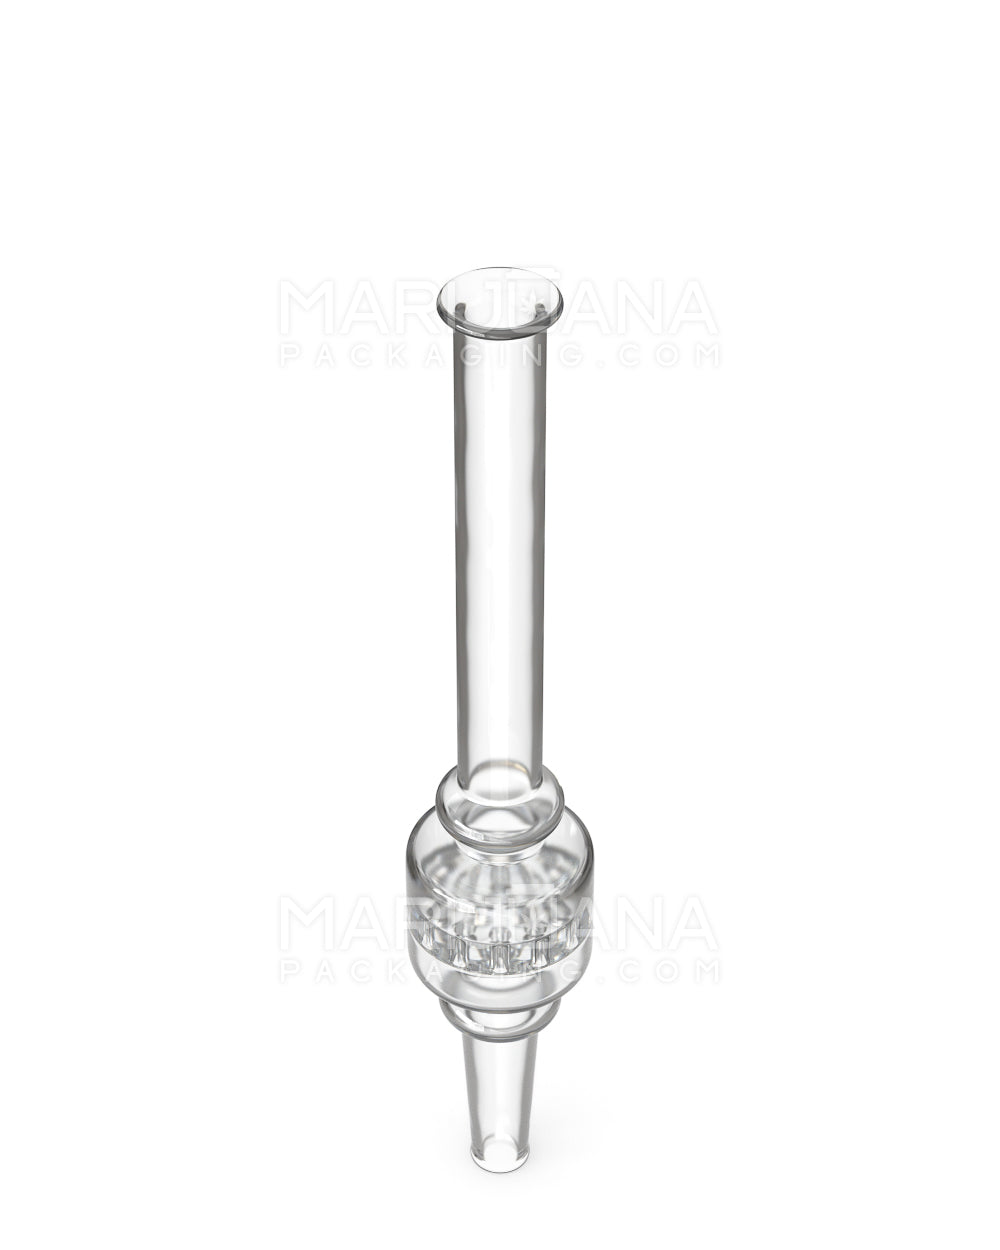 Honeycomb Percolator Dab Straw | 6in Long - Glass - Clear - 2